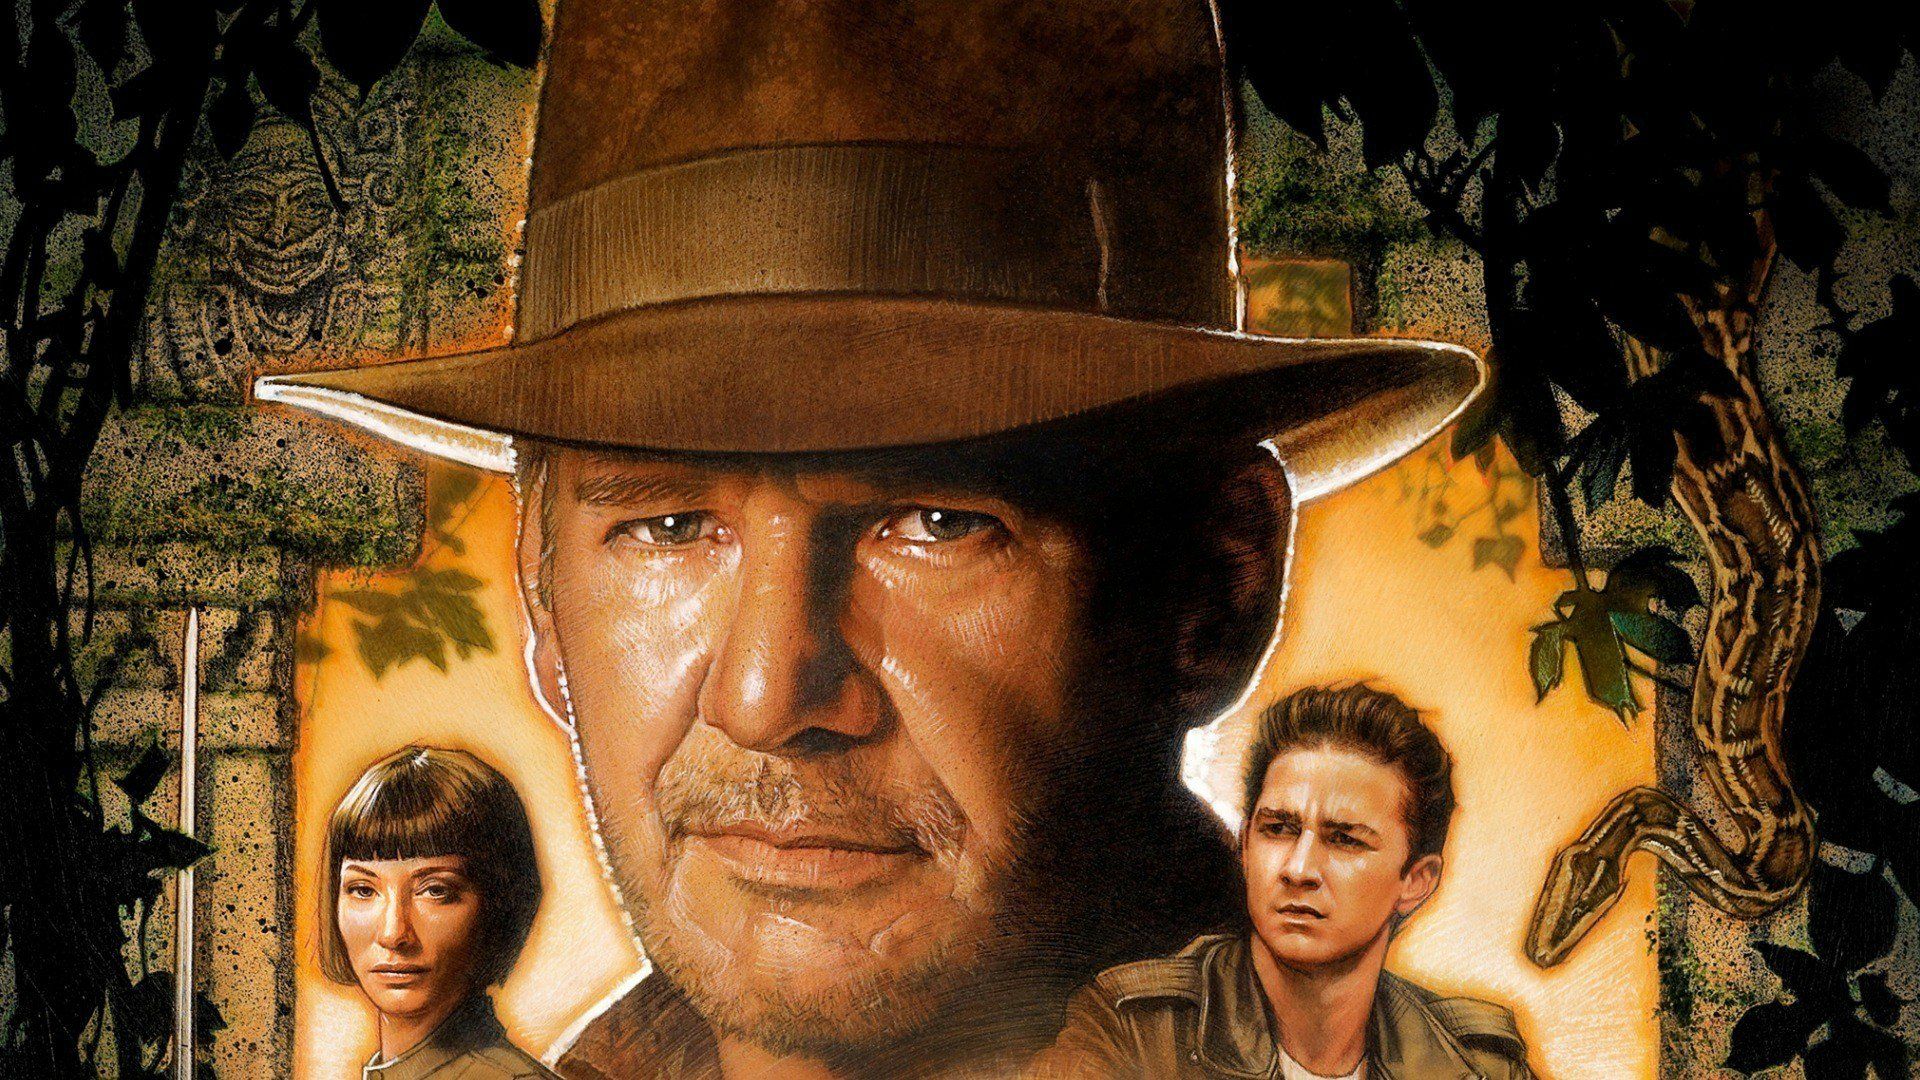 Movie Indiana Jones and the Kingdom of the Crystal Skull HD Wallpaper | Background Image